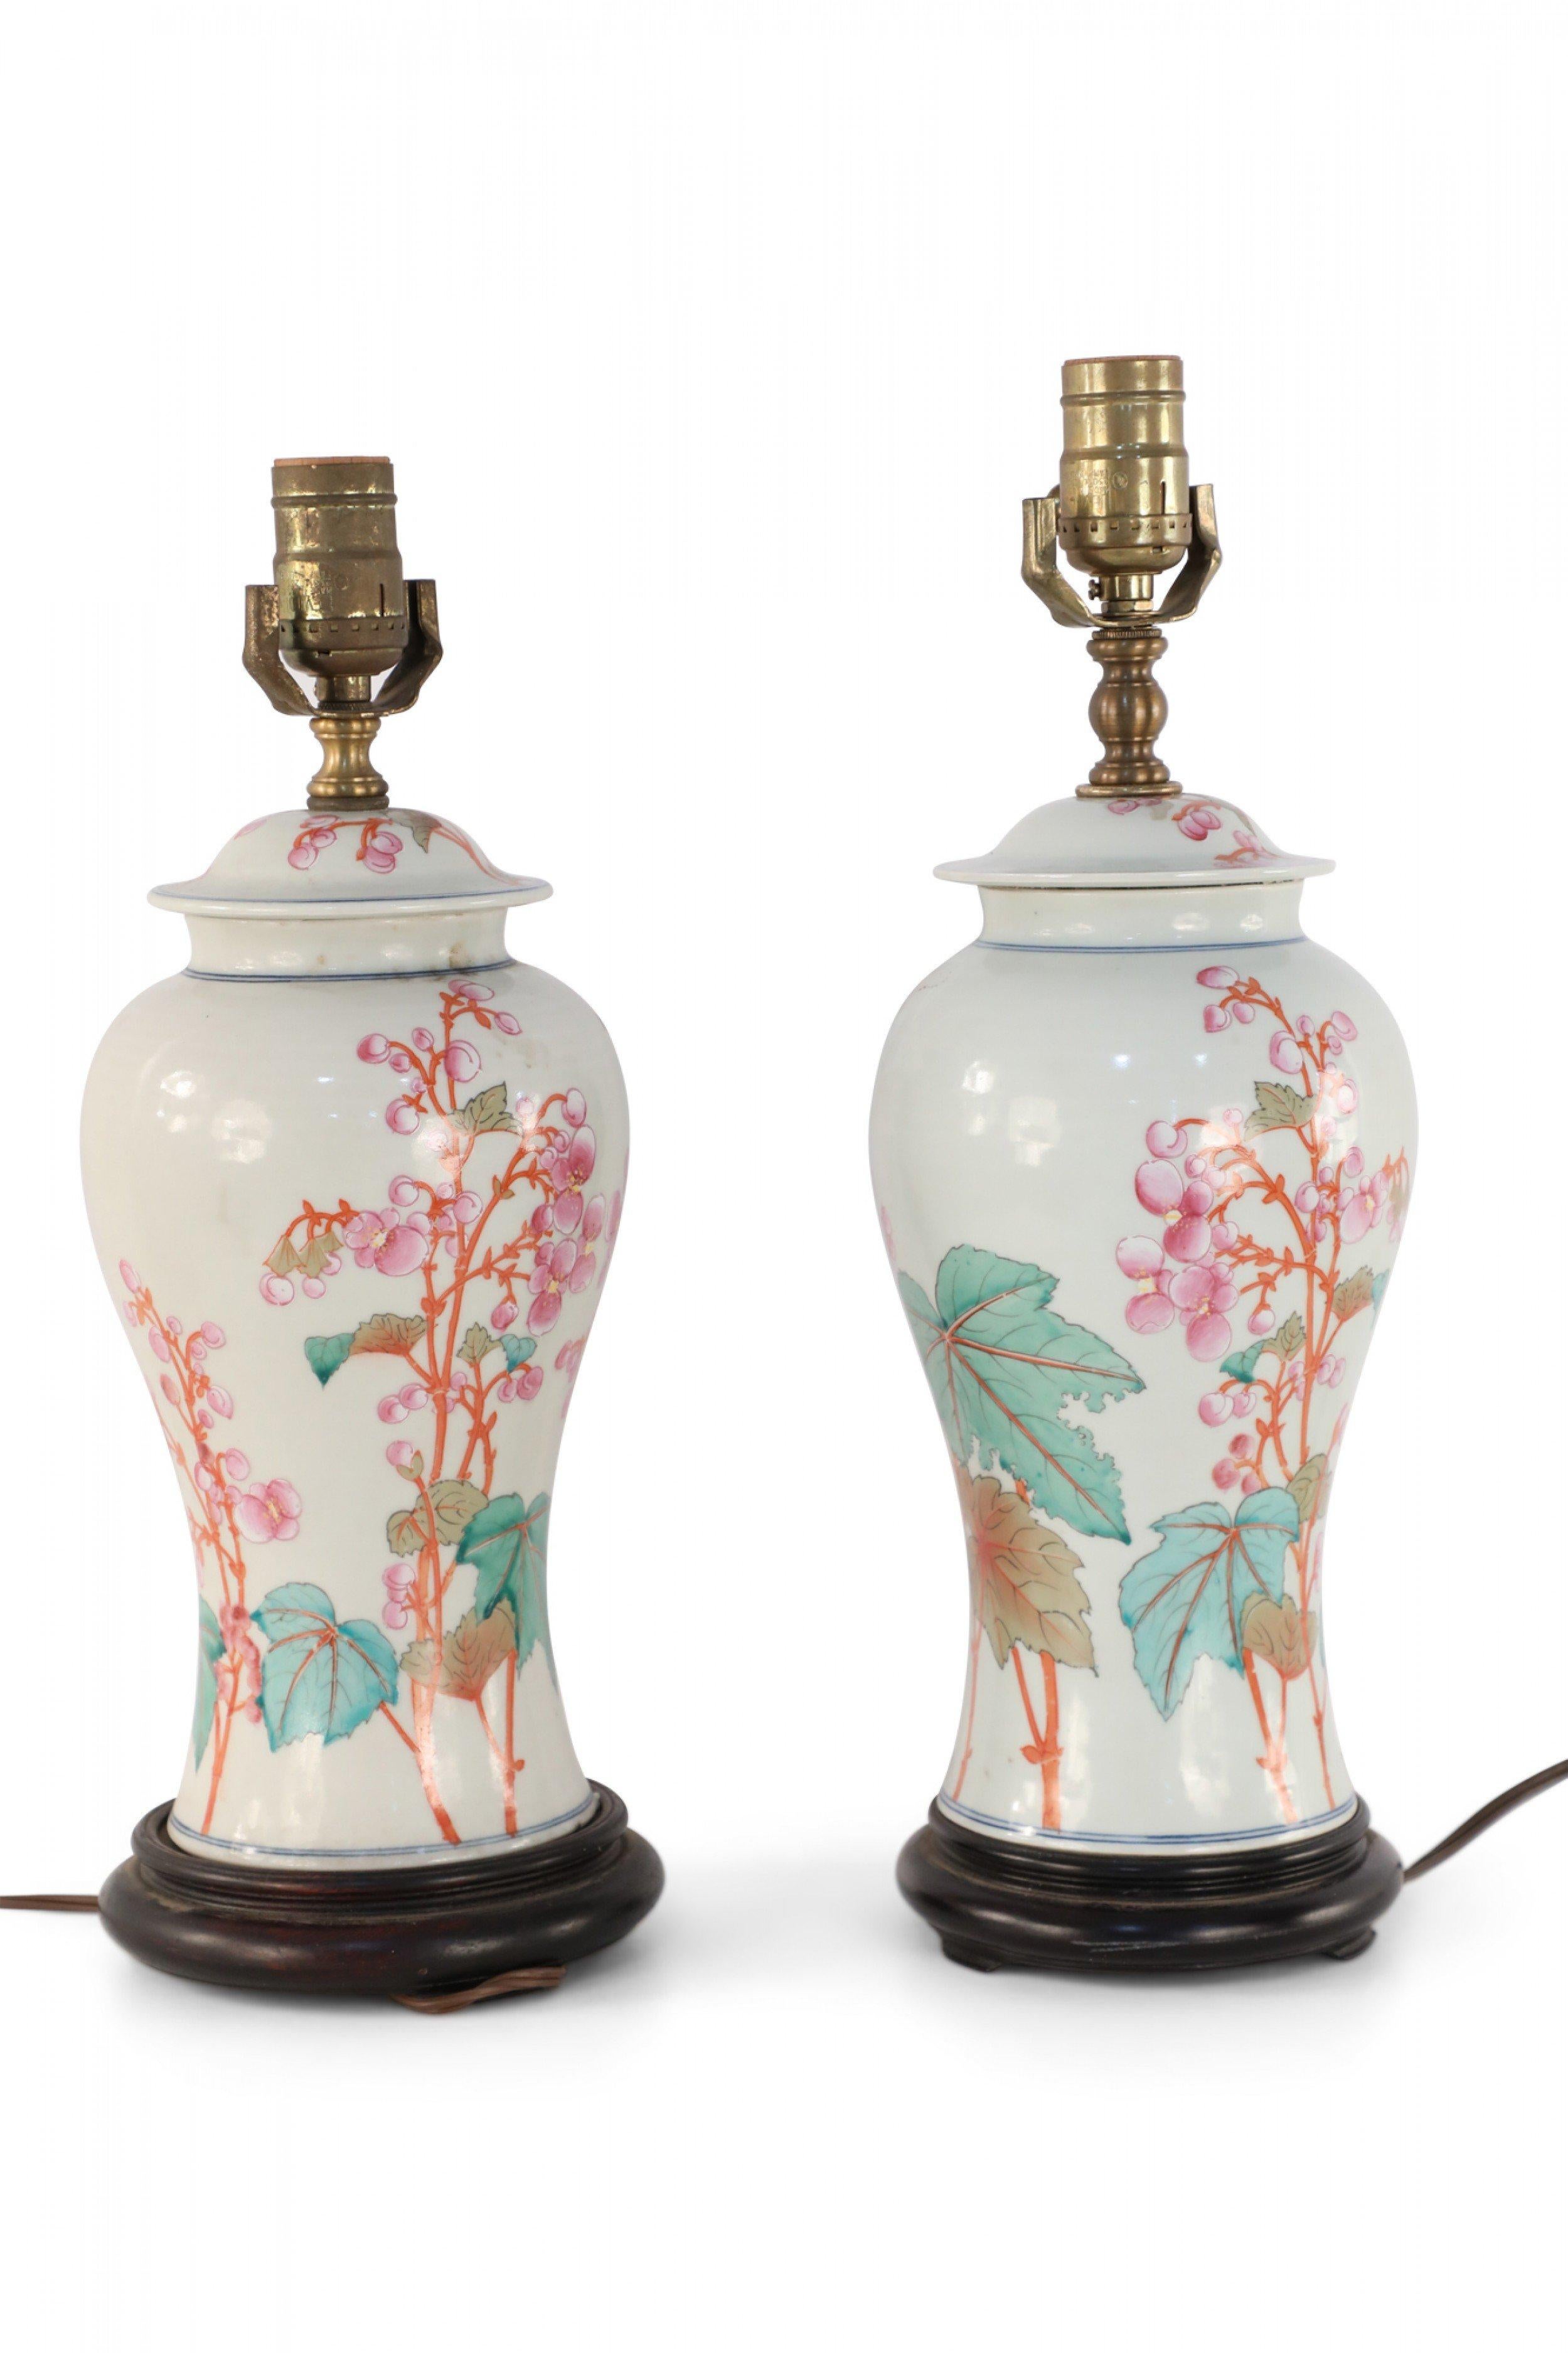 Pair of similar Chinese porcelain table lamps made from off-white, urn-shaped vases with pink, orange and green florals, berries, leaves and snap dragons with wooden bases and brass hardware (lamps vary slightly in height and pattern) (PRICED AS